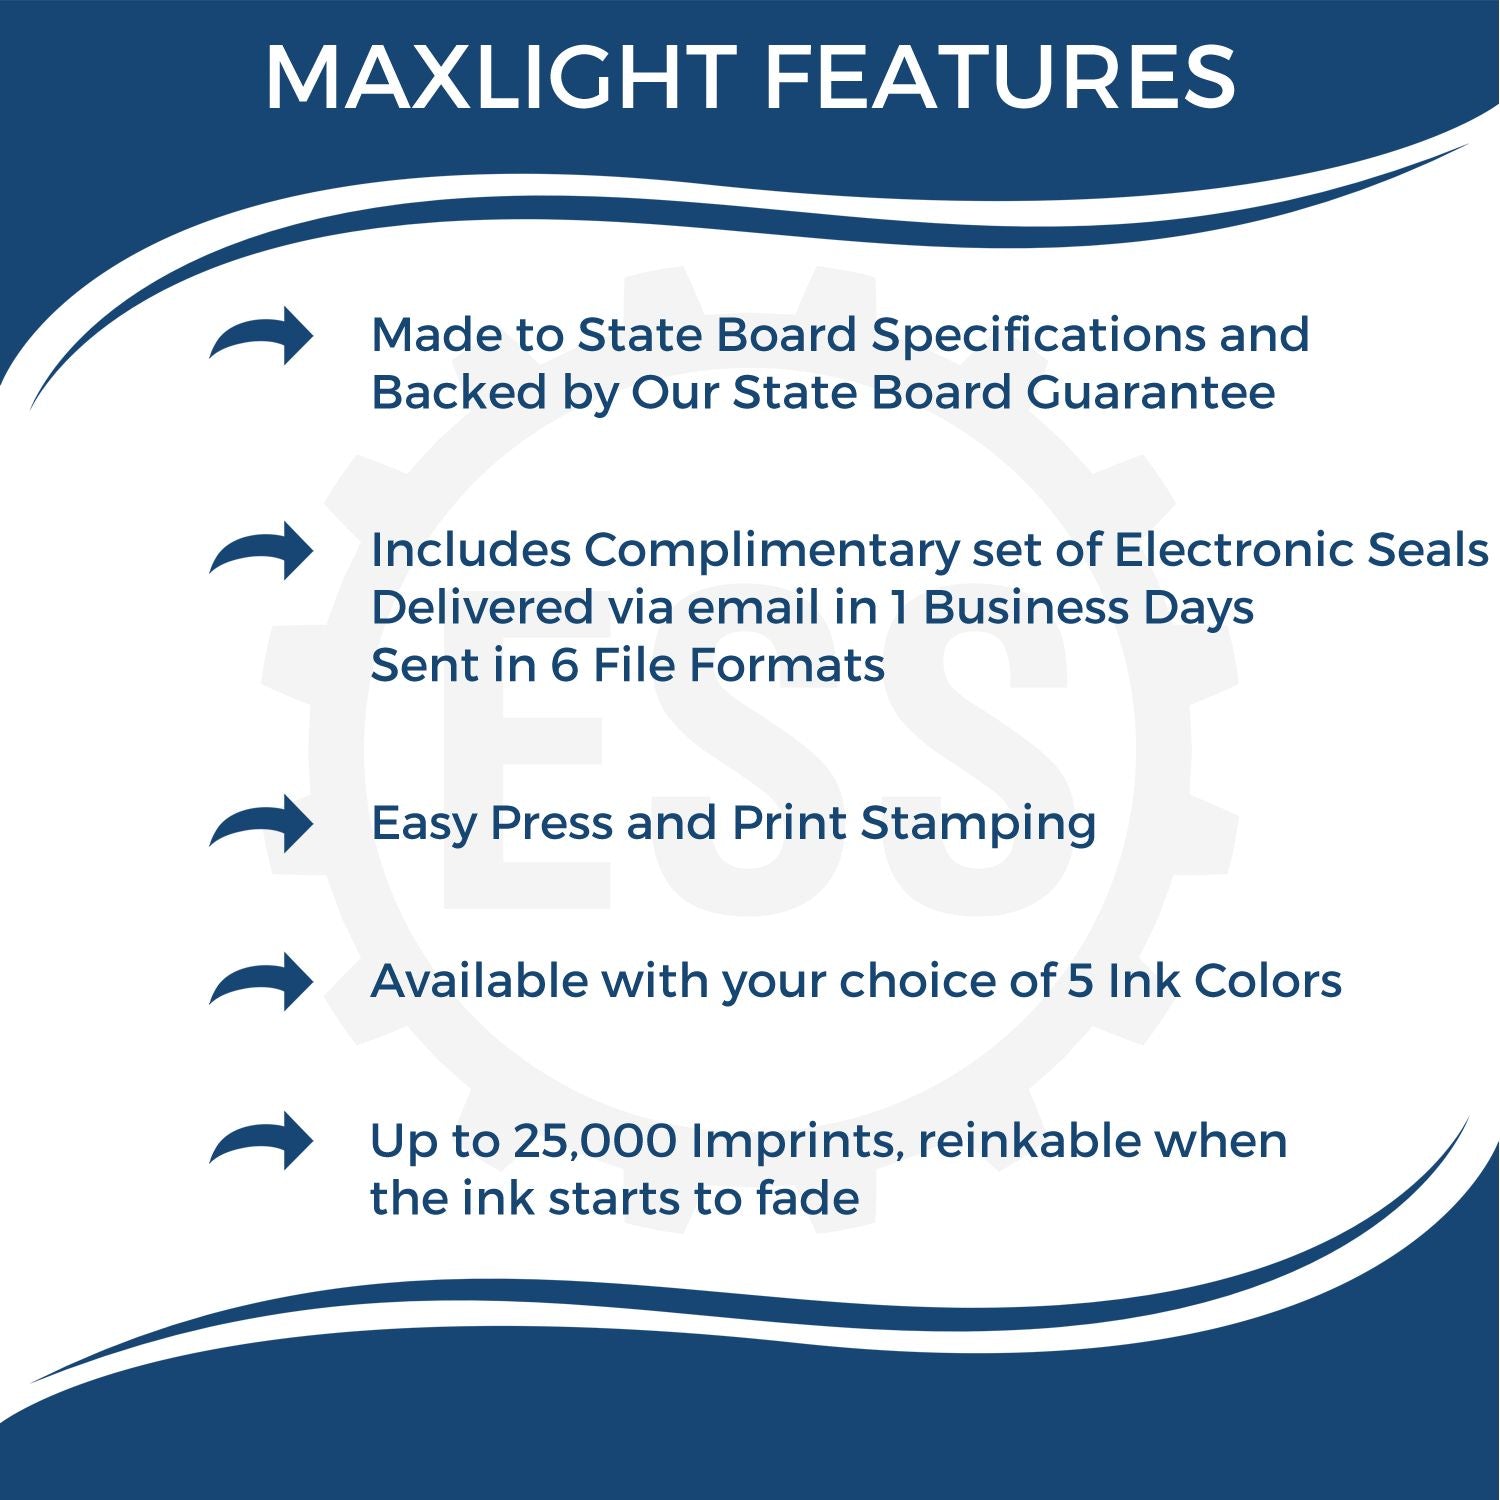 A picture of an infographic highlighting the selling points for the Premium MaxLight Pre-Inked Florida Landscape Architectural Stamp